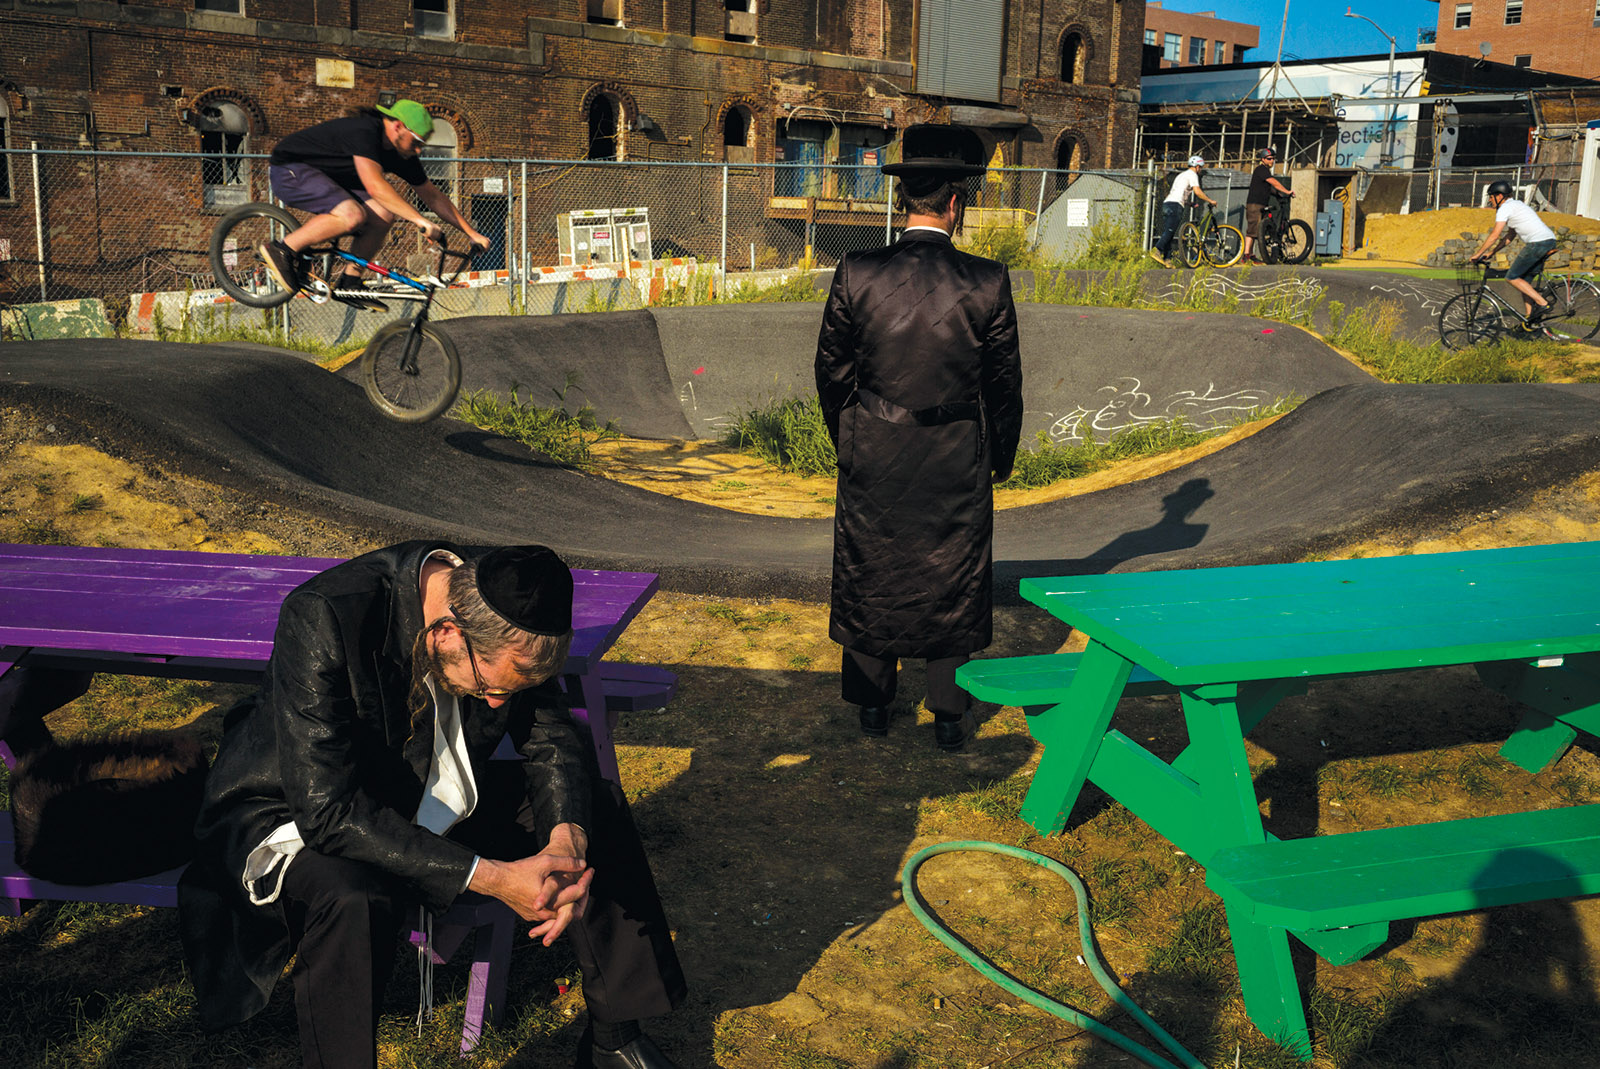 Two Hasidic men in a Williamsburg open lot with cyclists and picnic tables